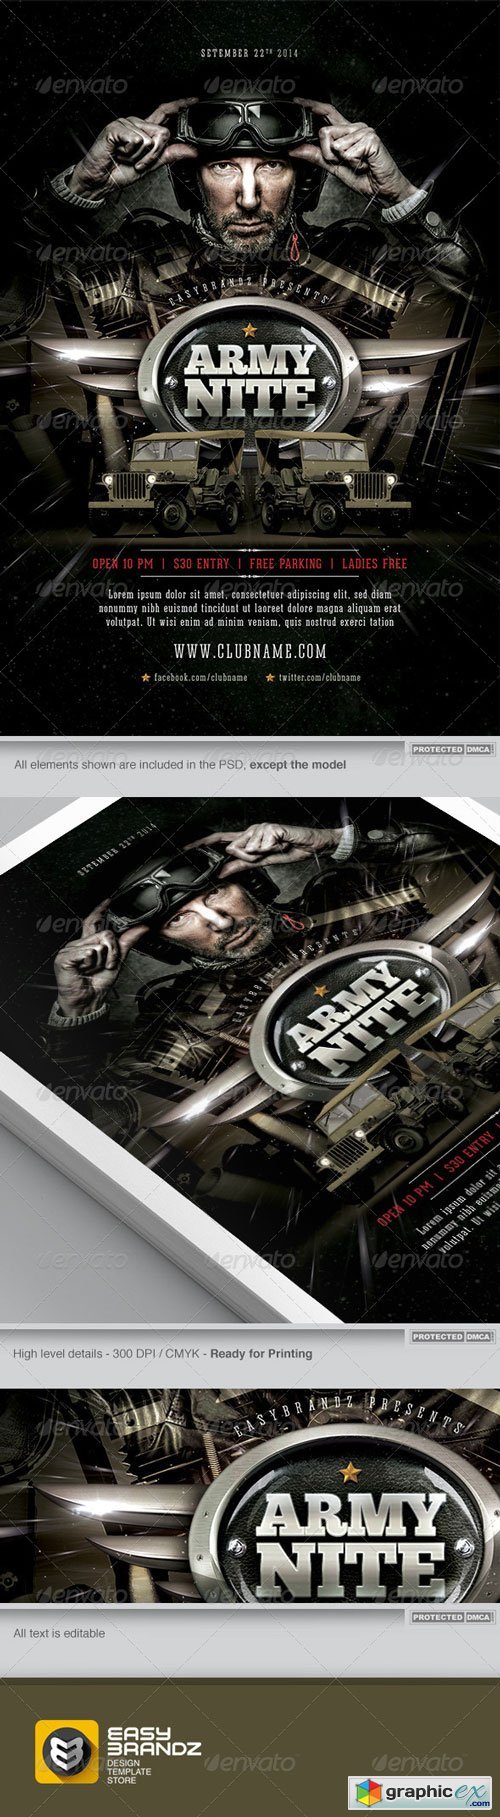 Army Nite Flyer Template